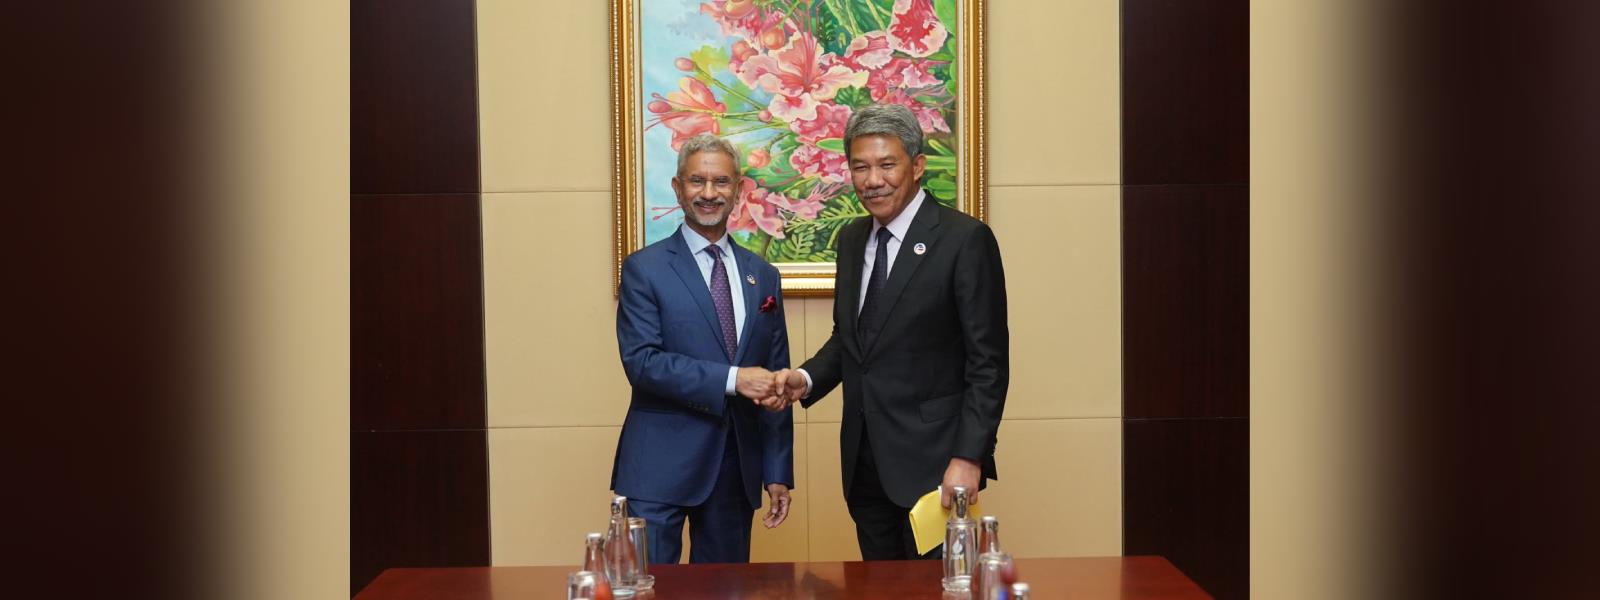 External Affairs Minister Dr. S. Jaishankar met H.E. Mohamad Haji Hasan, Foreign Minister of Malaysia on the sidelines of ASEAN meetings in Vientiane